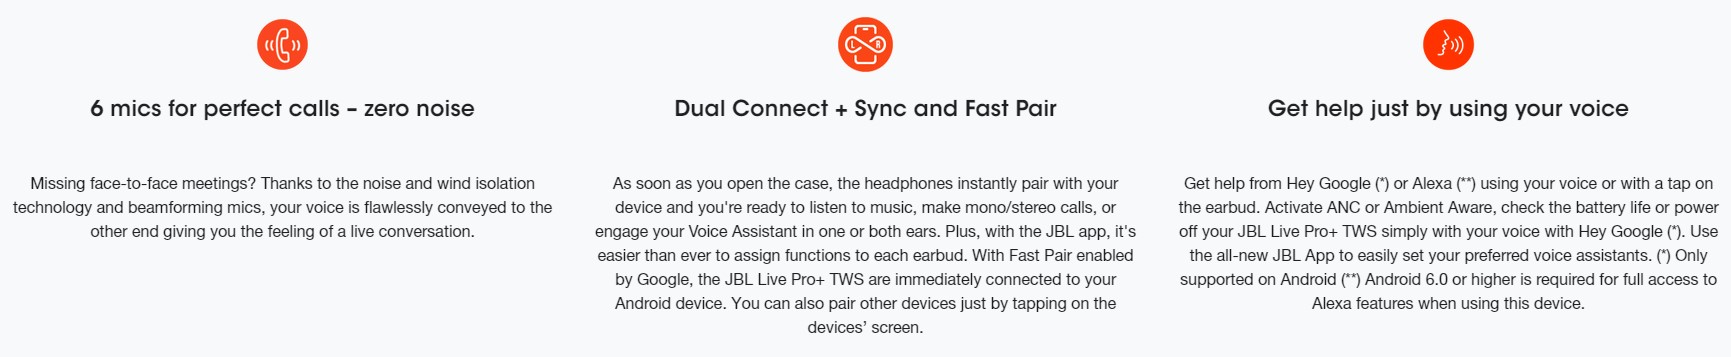 JBL Live Pro Plus,หูฟังไร้สาย JBL Live Pro Plus,True Wireless,หูฟังบลูทูธ,wireless charge,เสียงดี,active noise cancelling,smart ambient